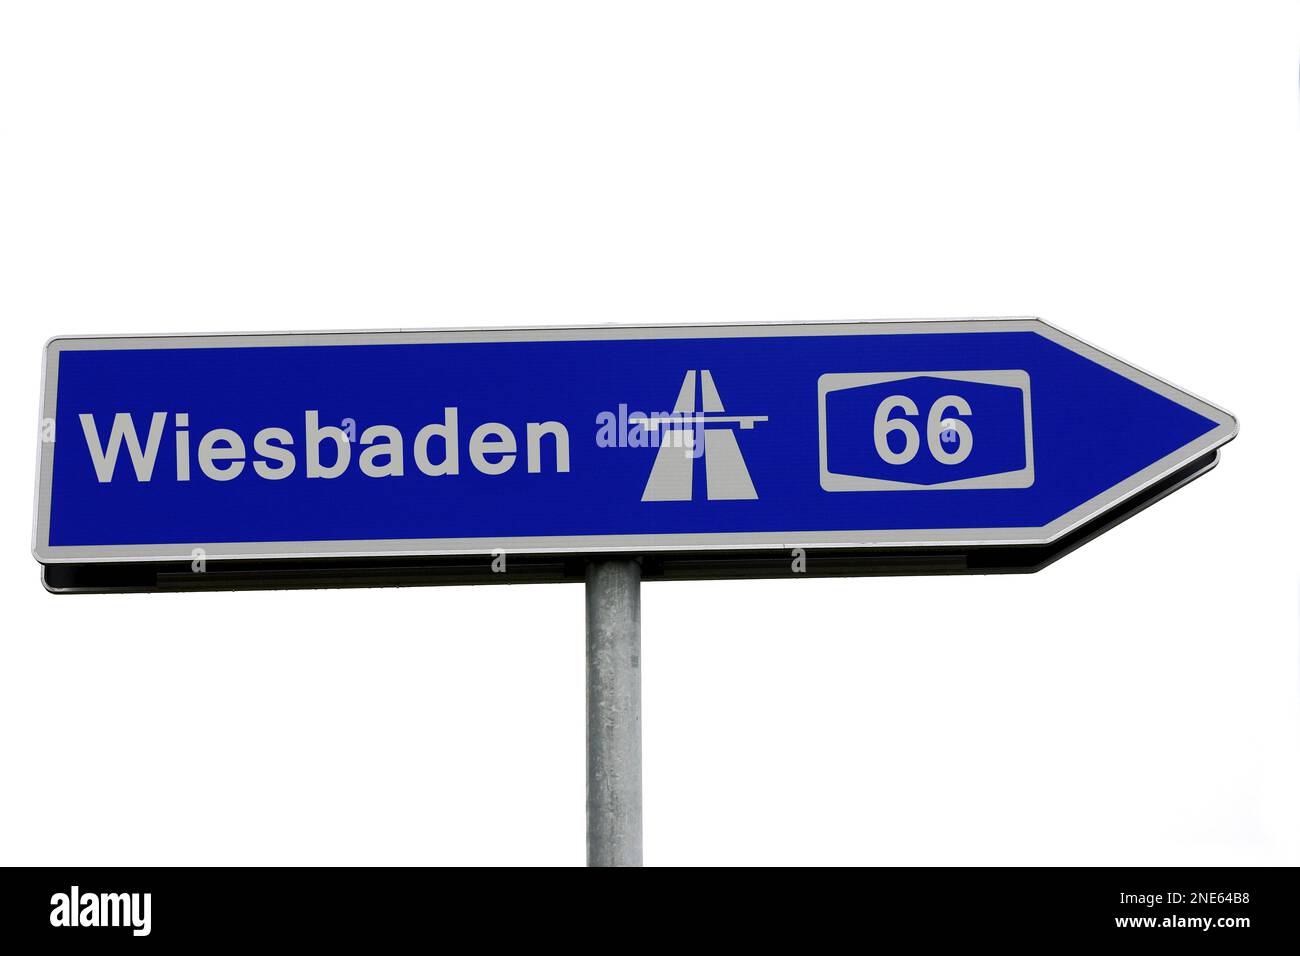 Signpost to the A66 motorway towards Wiesbaden Stock Photo